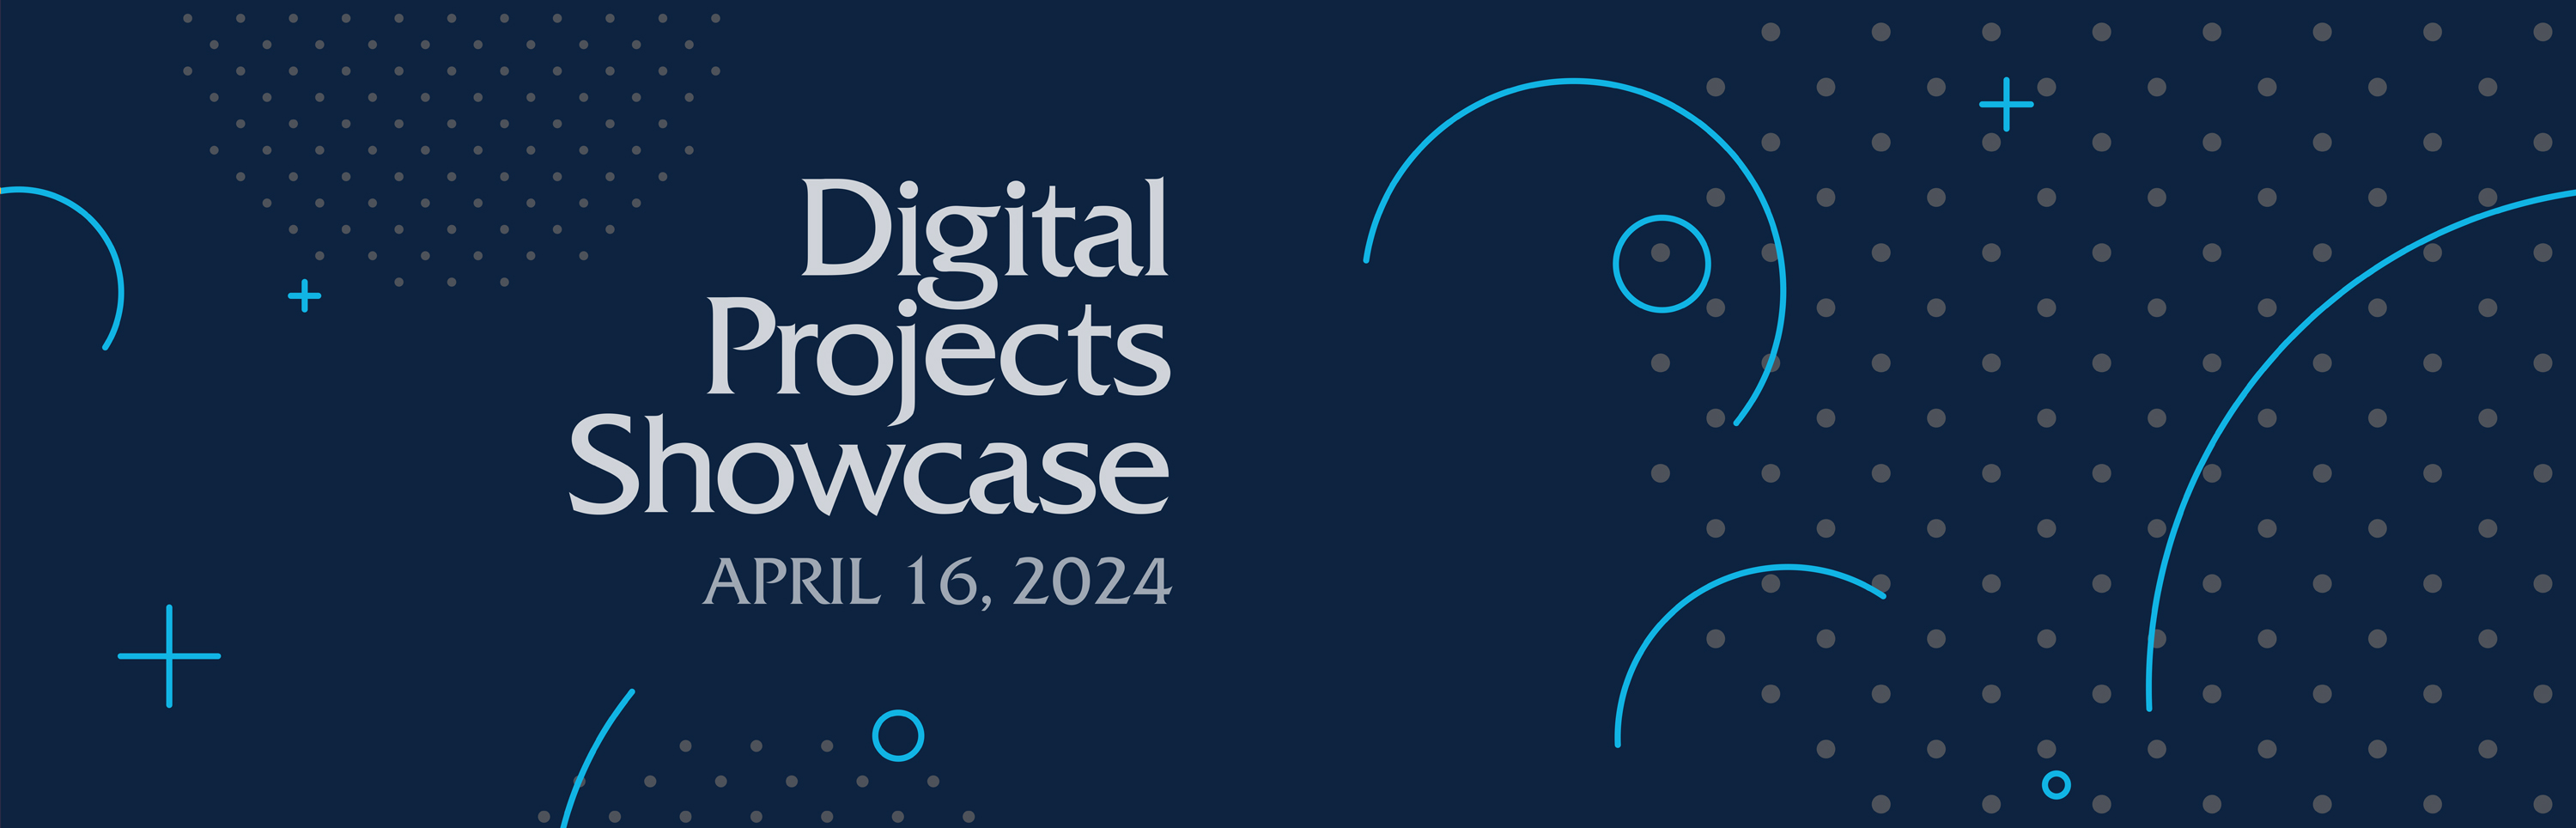 Digital Projects Showcase. April 16th, 2024